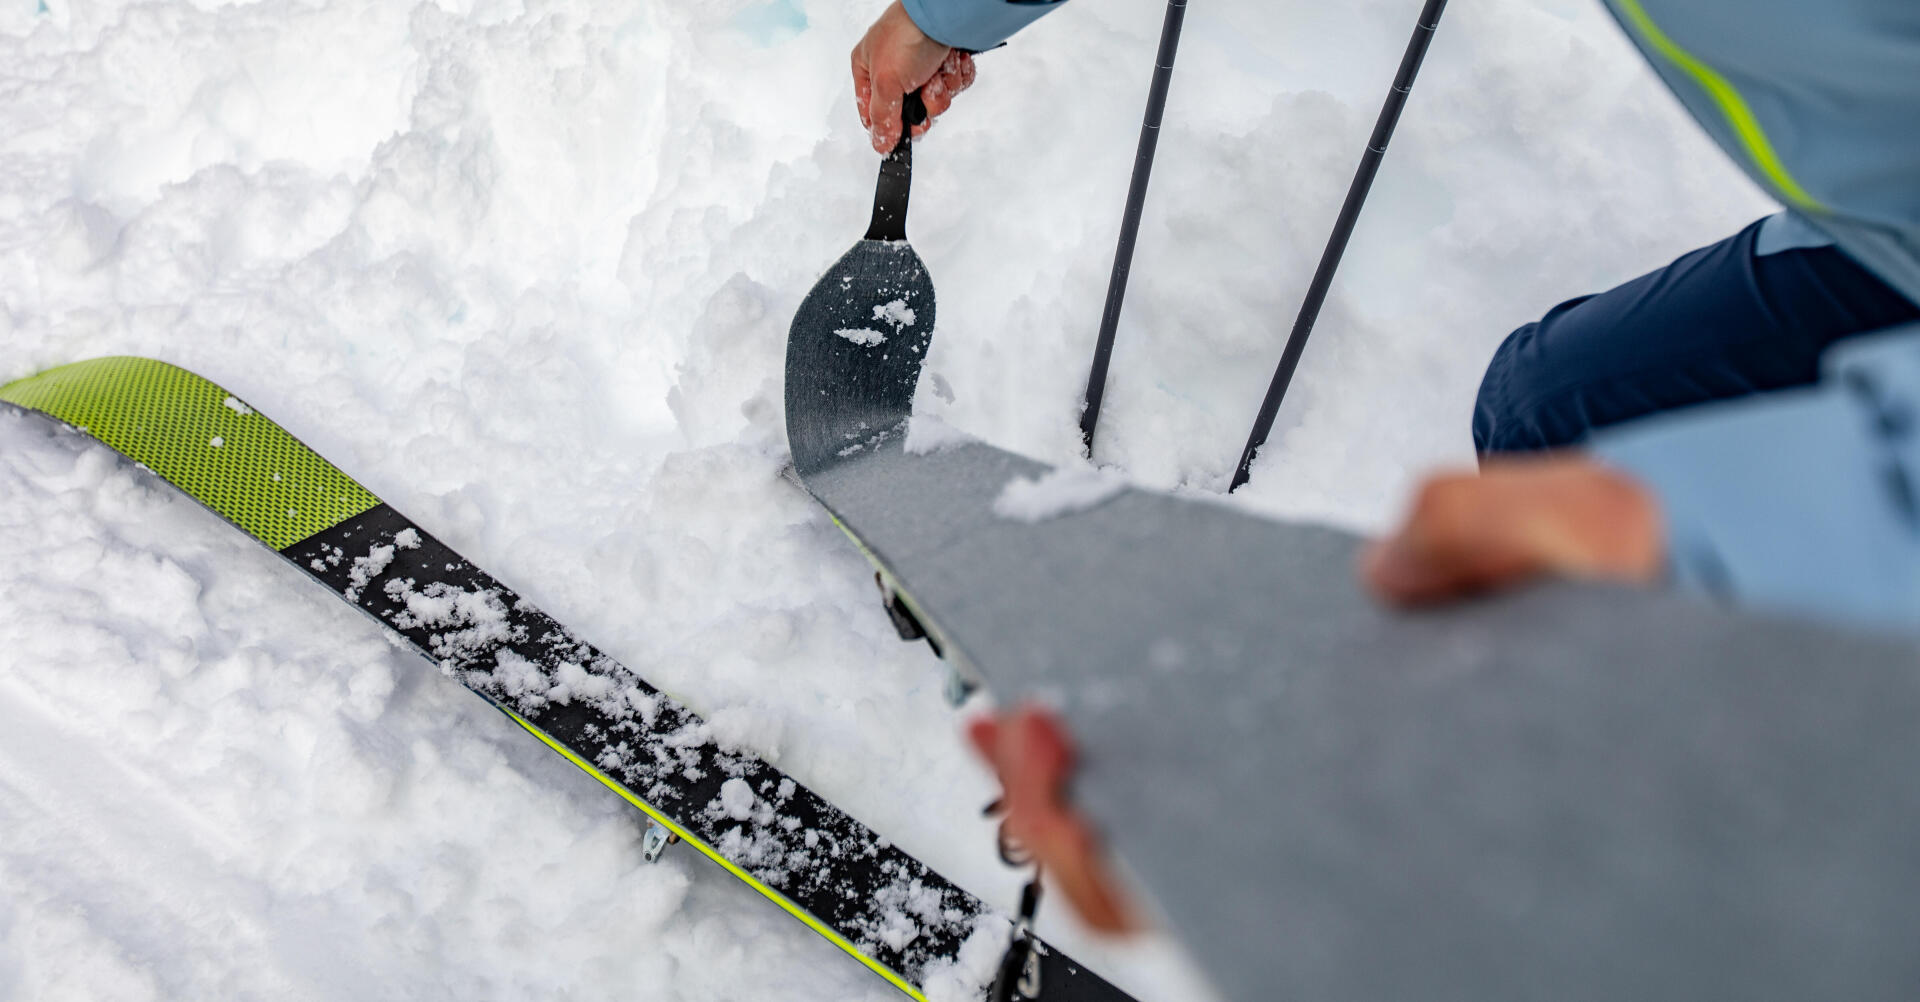 Our cross-country ski care guide